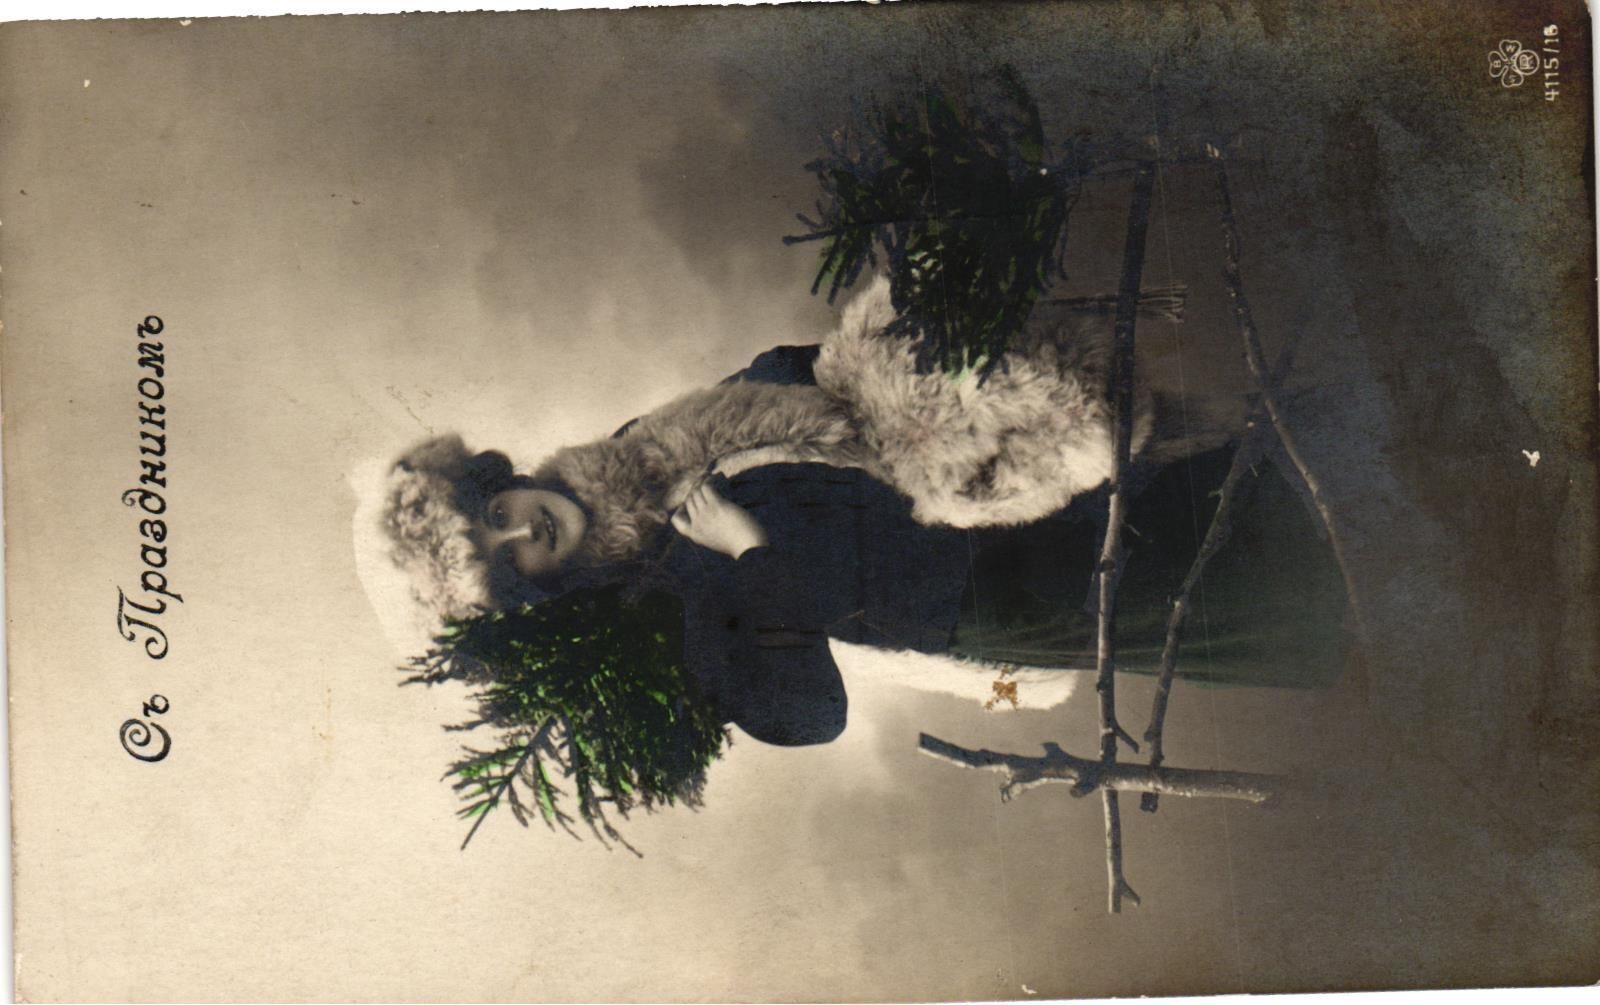 Vintage Postcard- A woman with a branch. Early 1900s